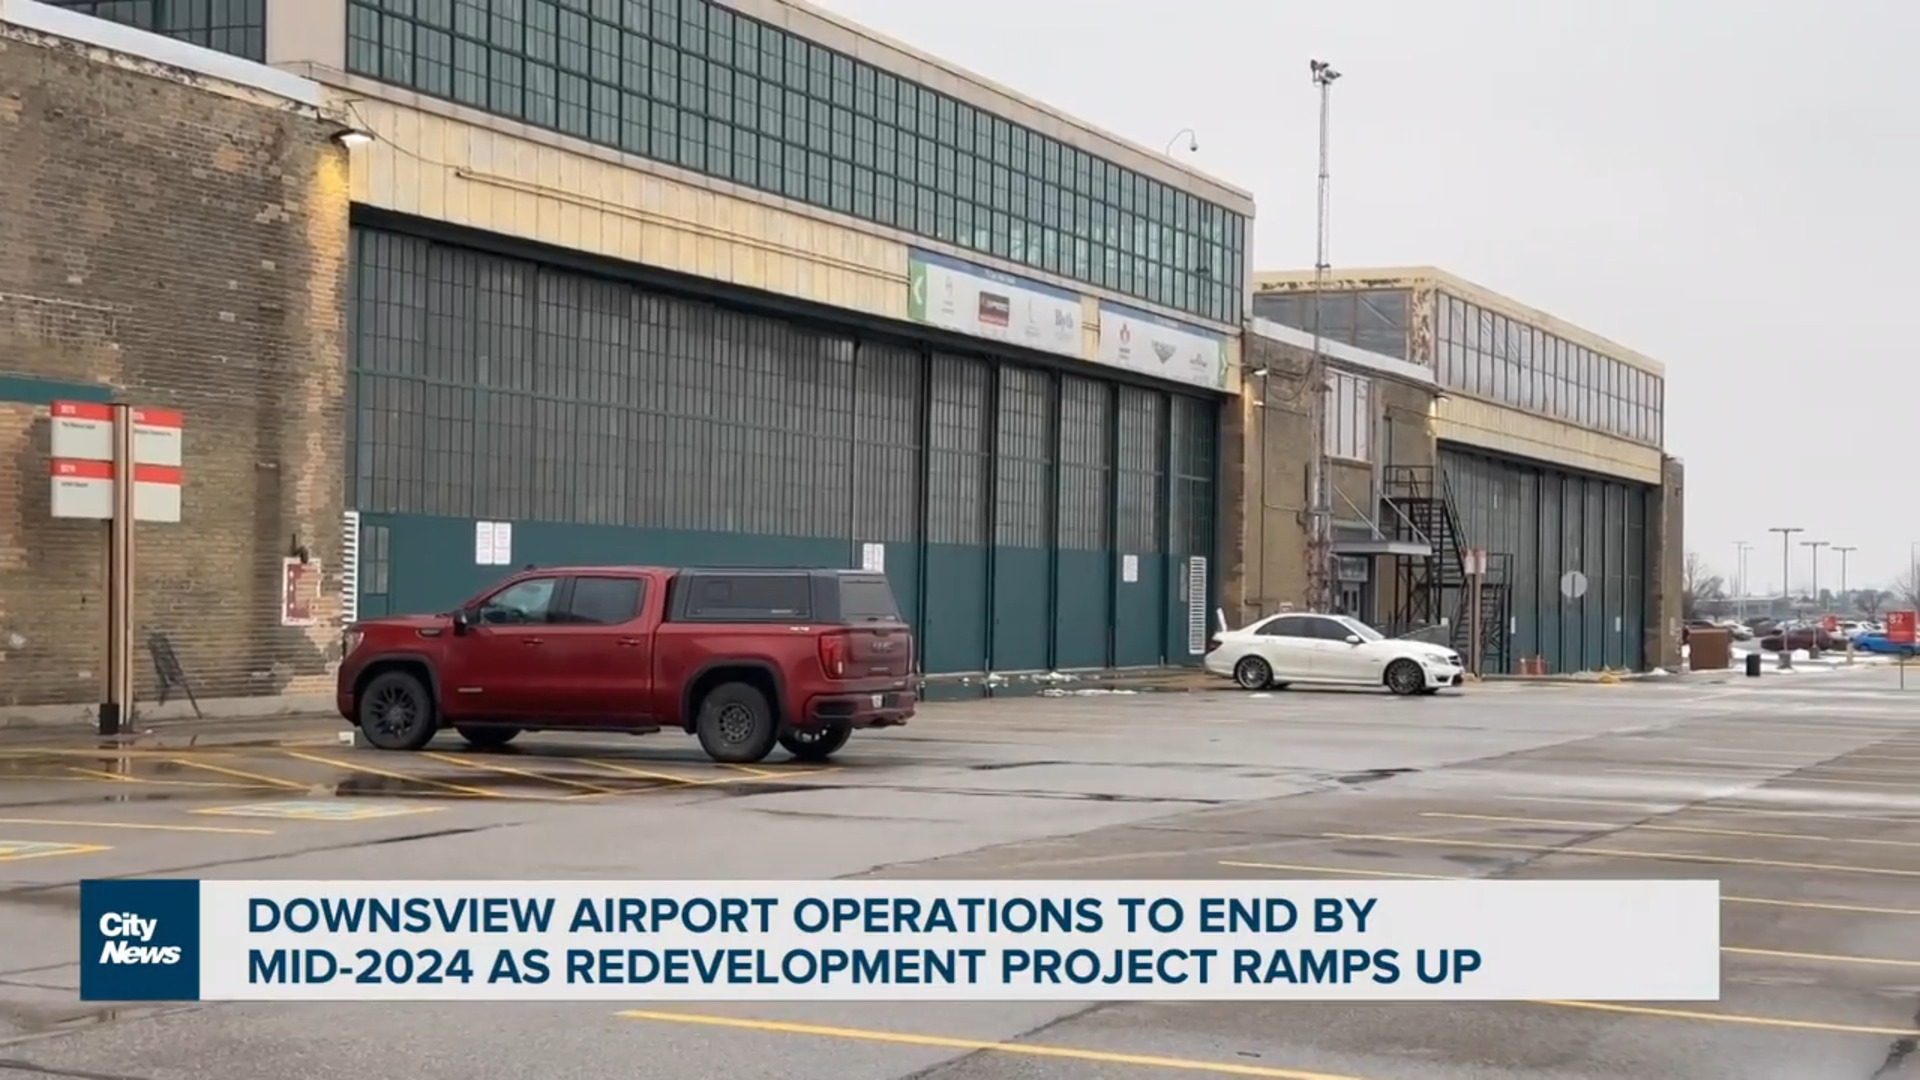 Downsview airport operations to end by mid-2024 as redevelopment project ramps up